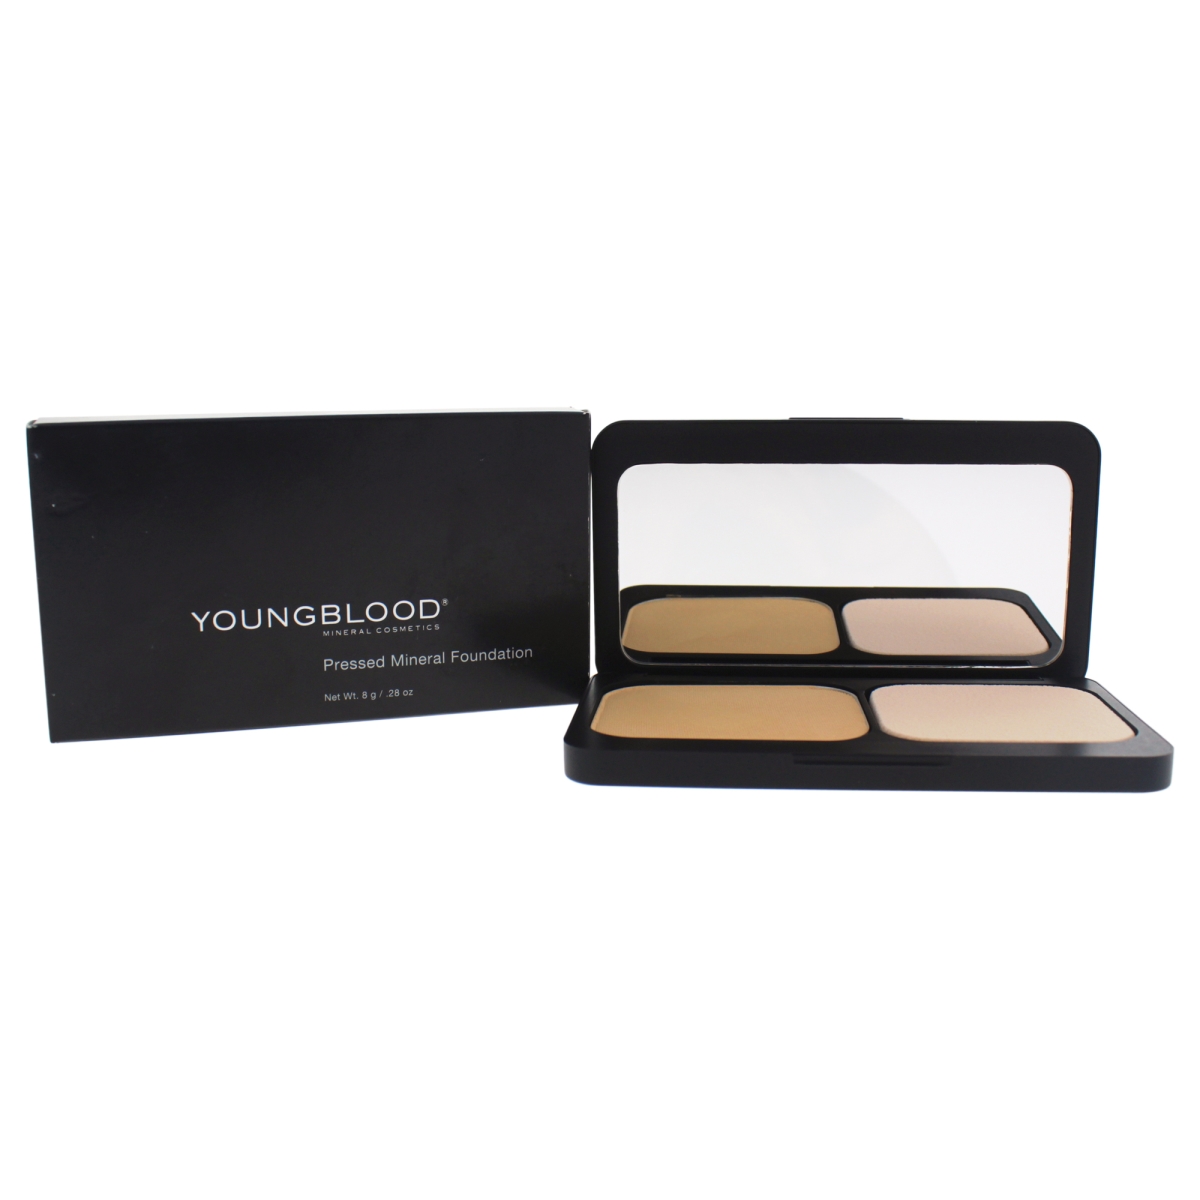 Picture of Youngblood W-C-11954 Pressed Mineral Foundation - Warm Beige for Women - 0.28 oz